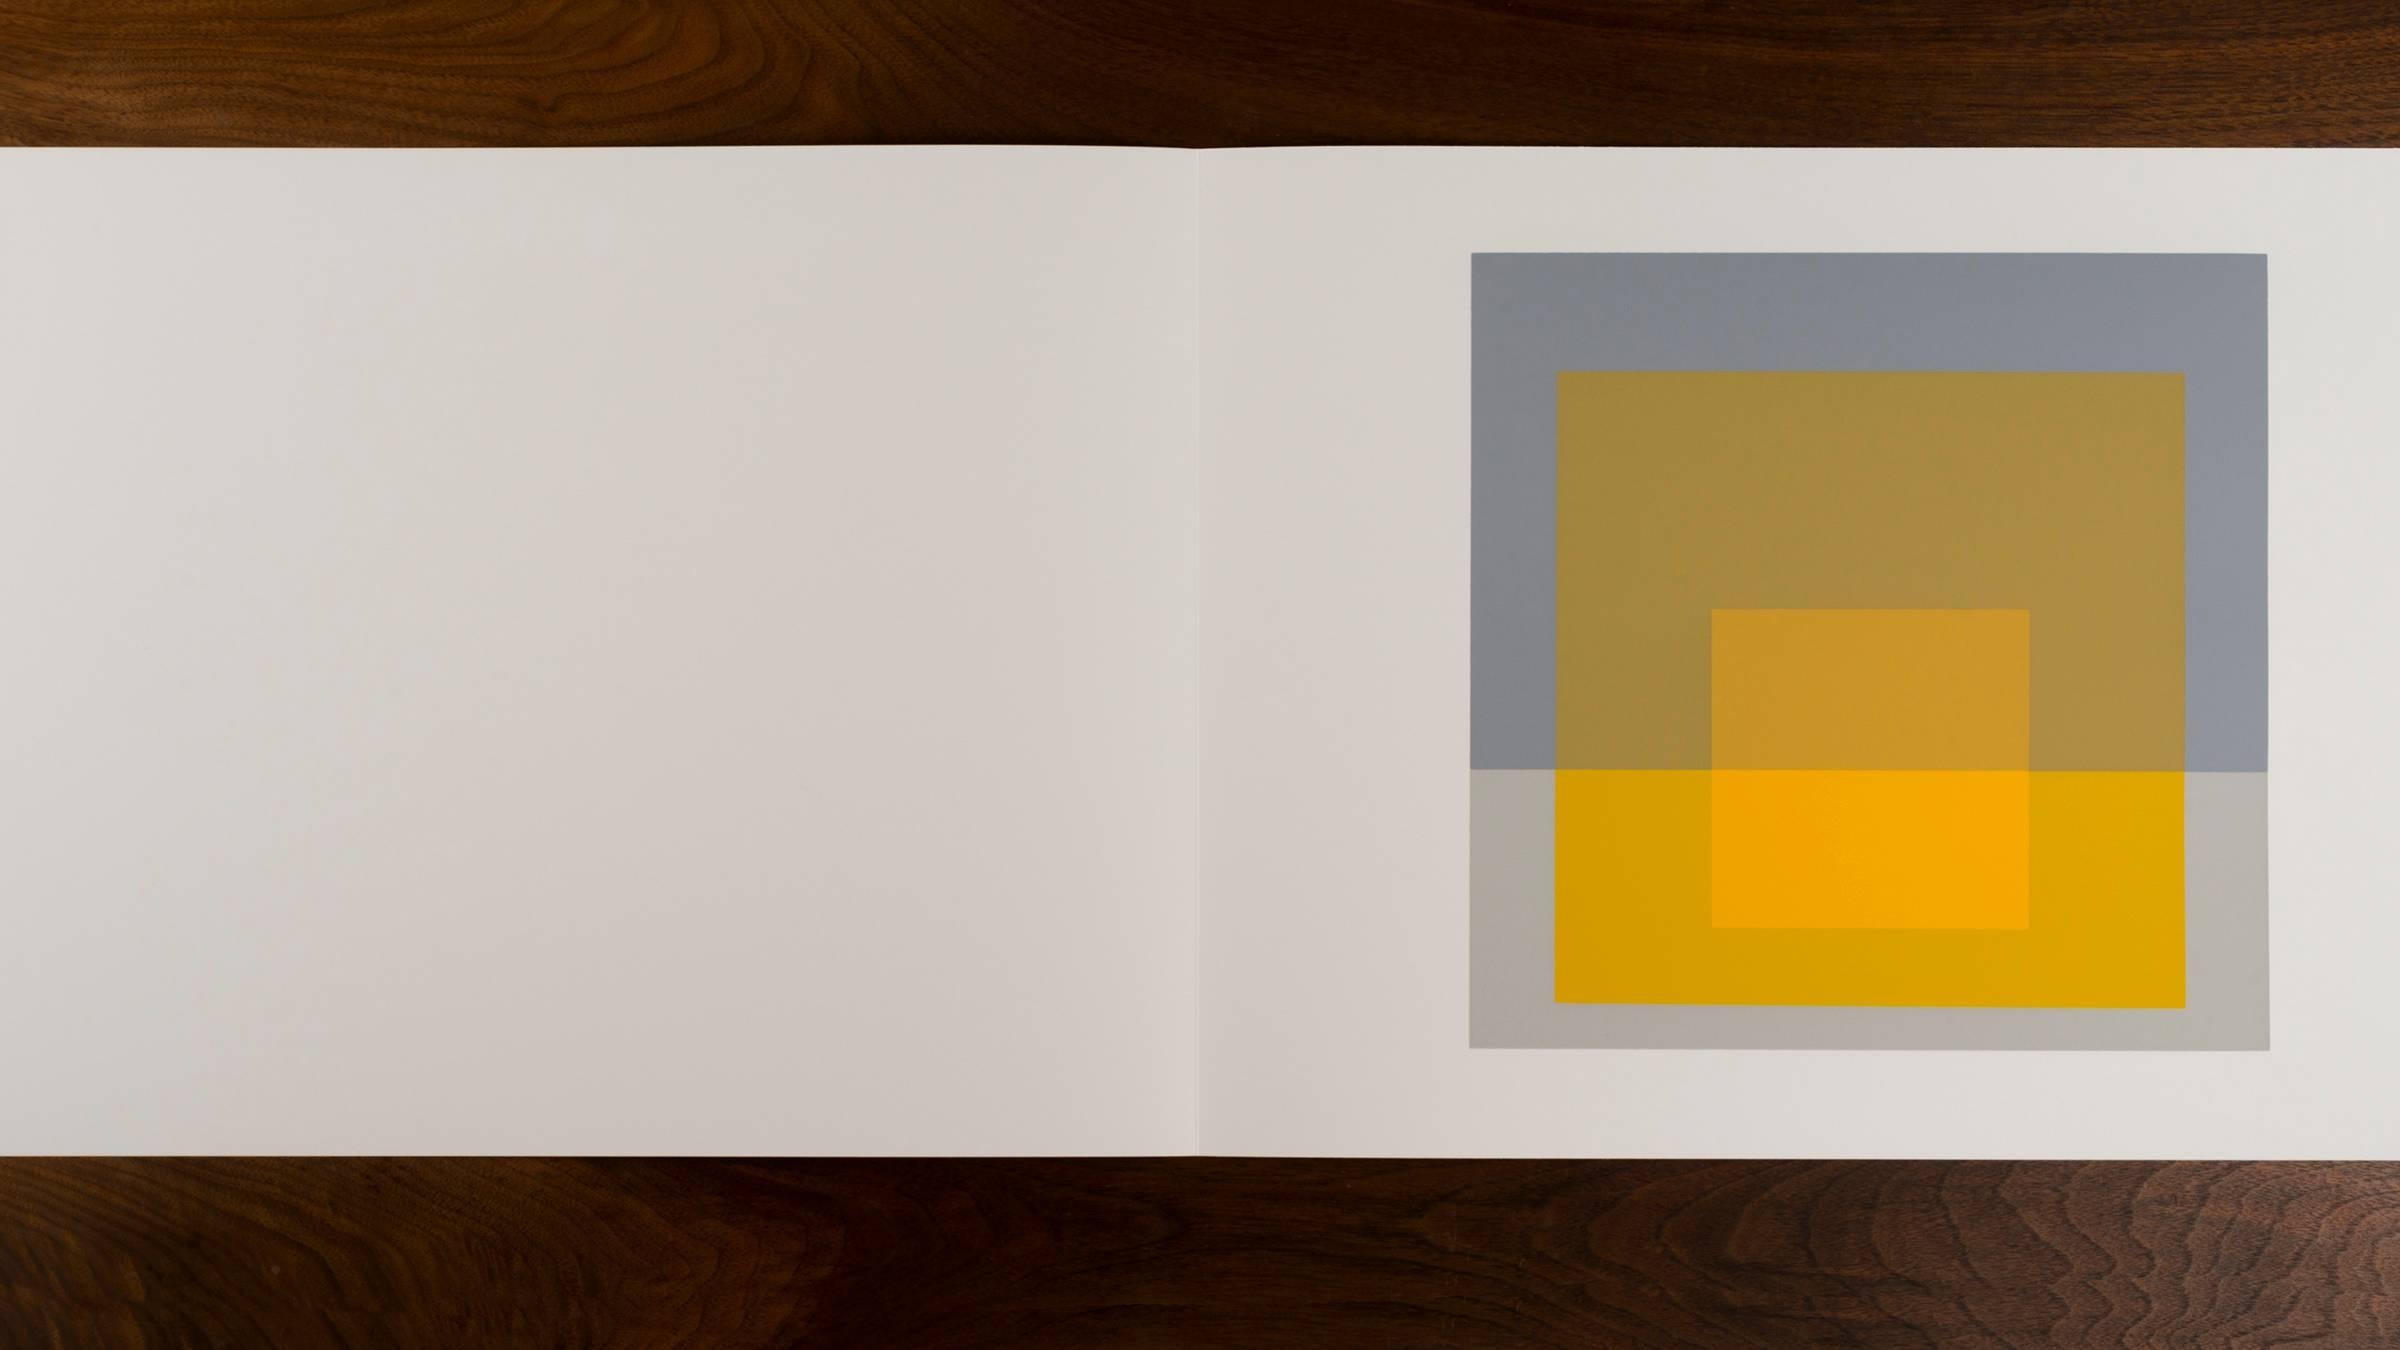 Josef Albers Formulations - Articulations I & II
Edition 974/ 1000
1972 screen-print on paper Homage to the Square
Embossed with Josef Albers initials, portfolio and folder number. This work is published by Harry N. Abrams and Ives-Sillman.
This